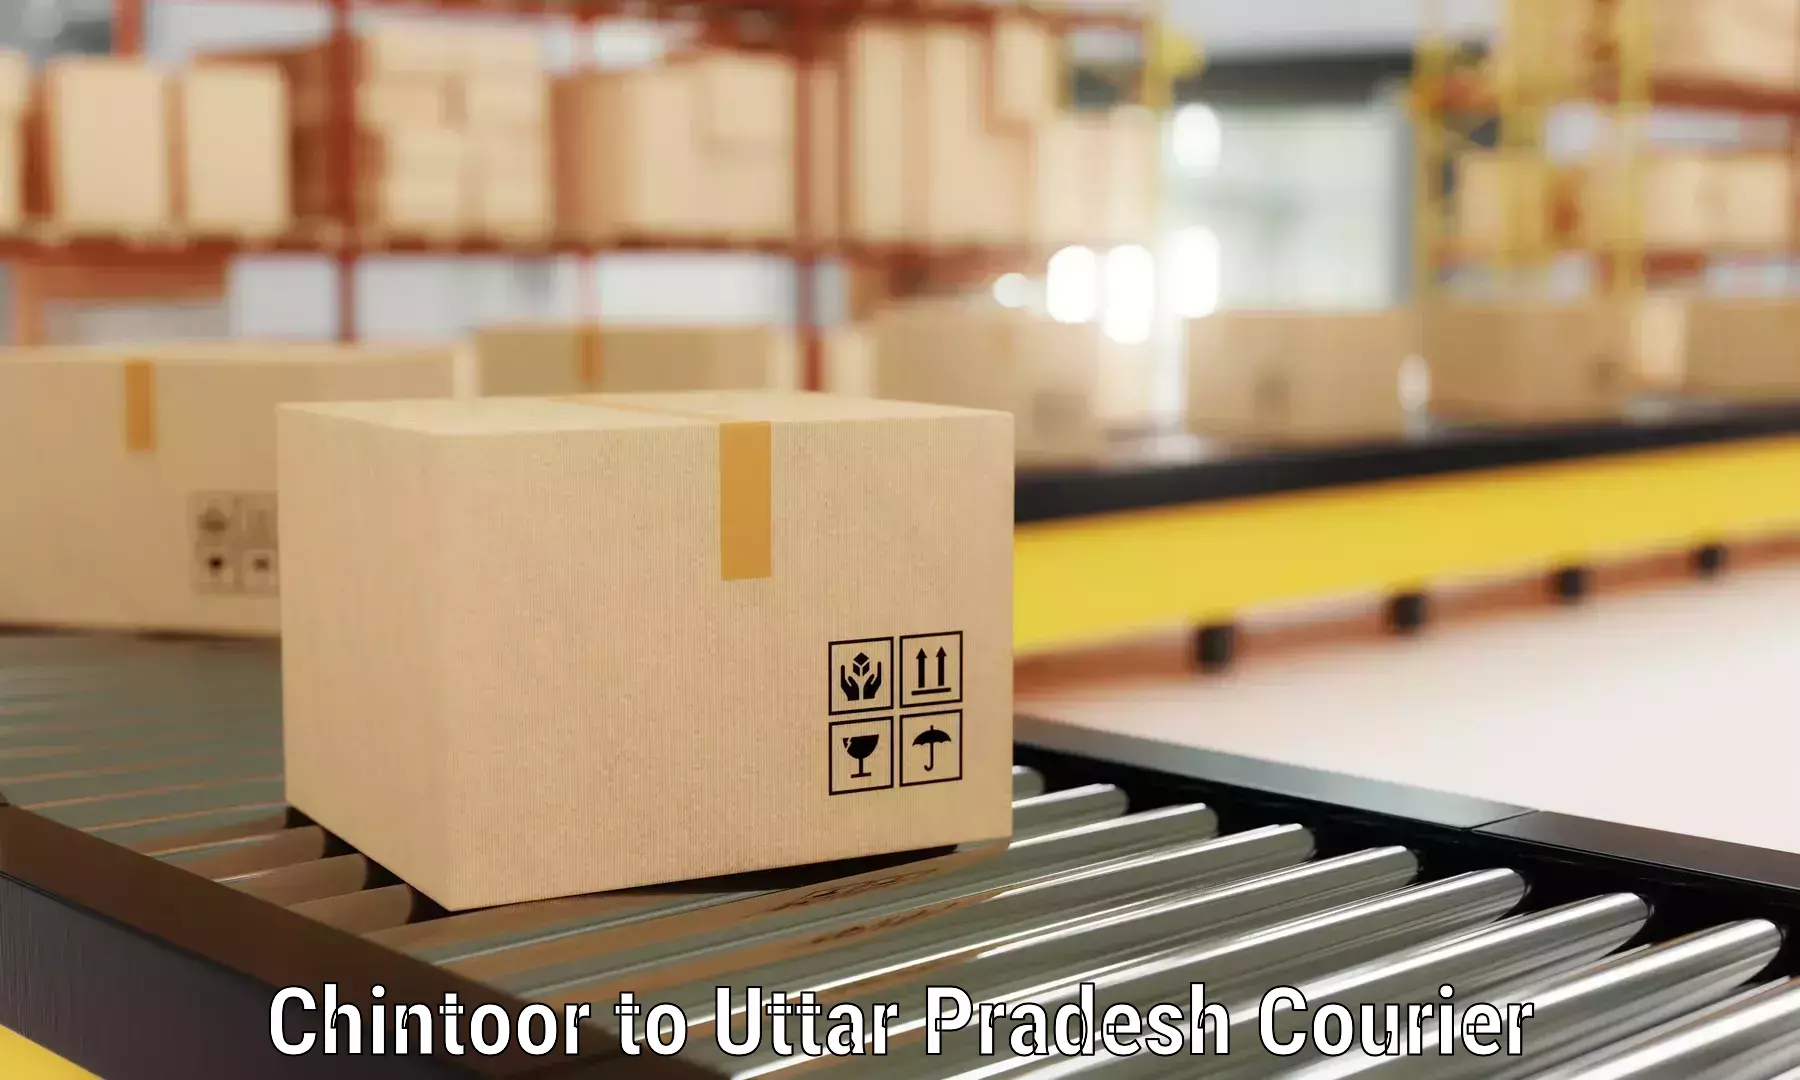 Budget-friendly movers Chintoor to Aligarh